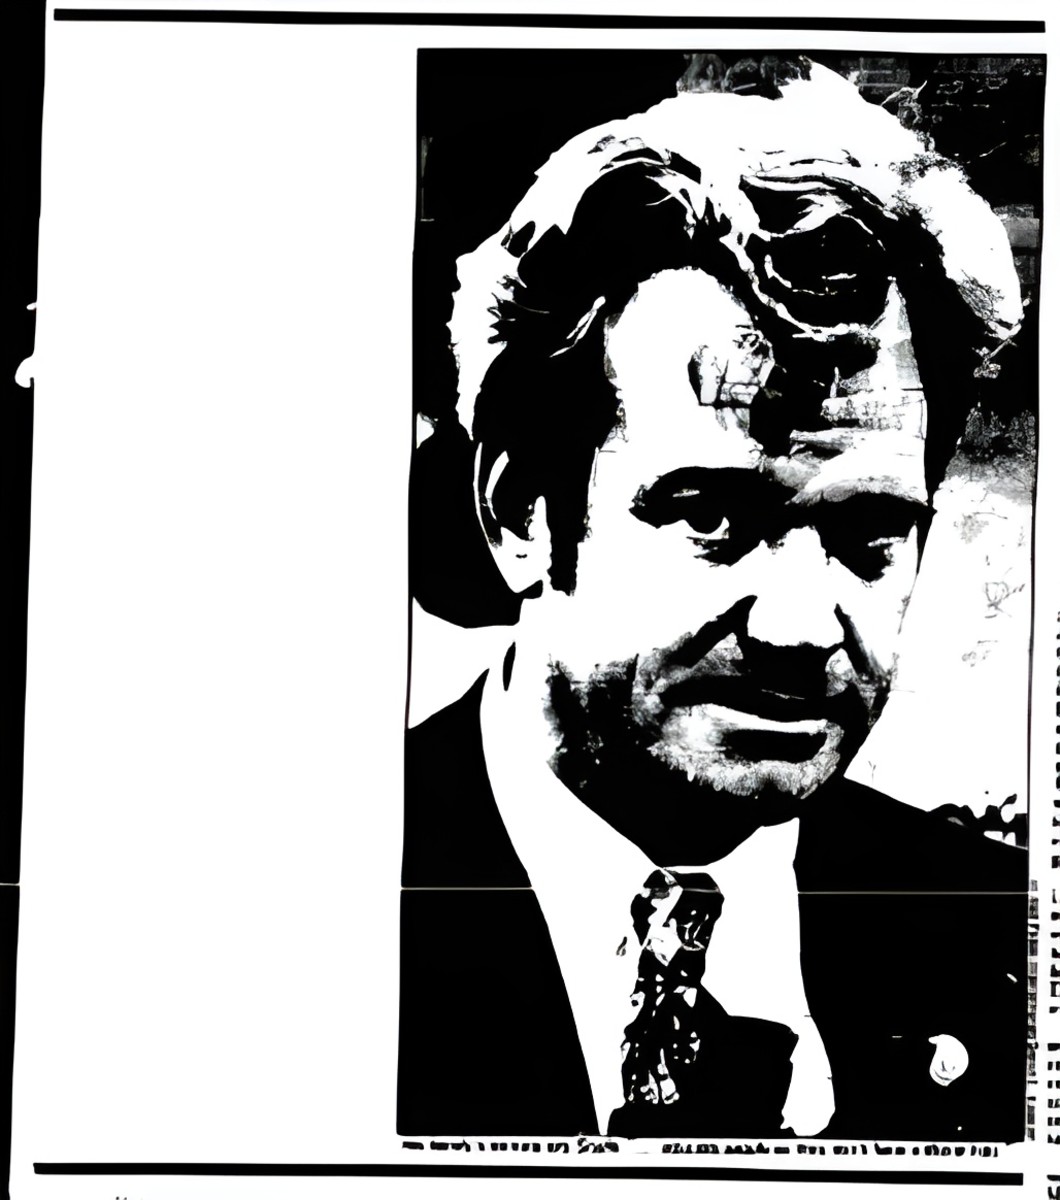 Scaife in the Philadelphia Inquirer, January 24, 1982